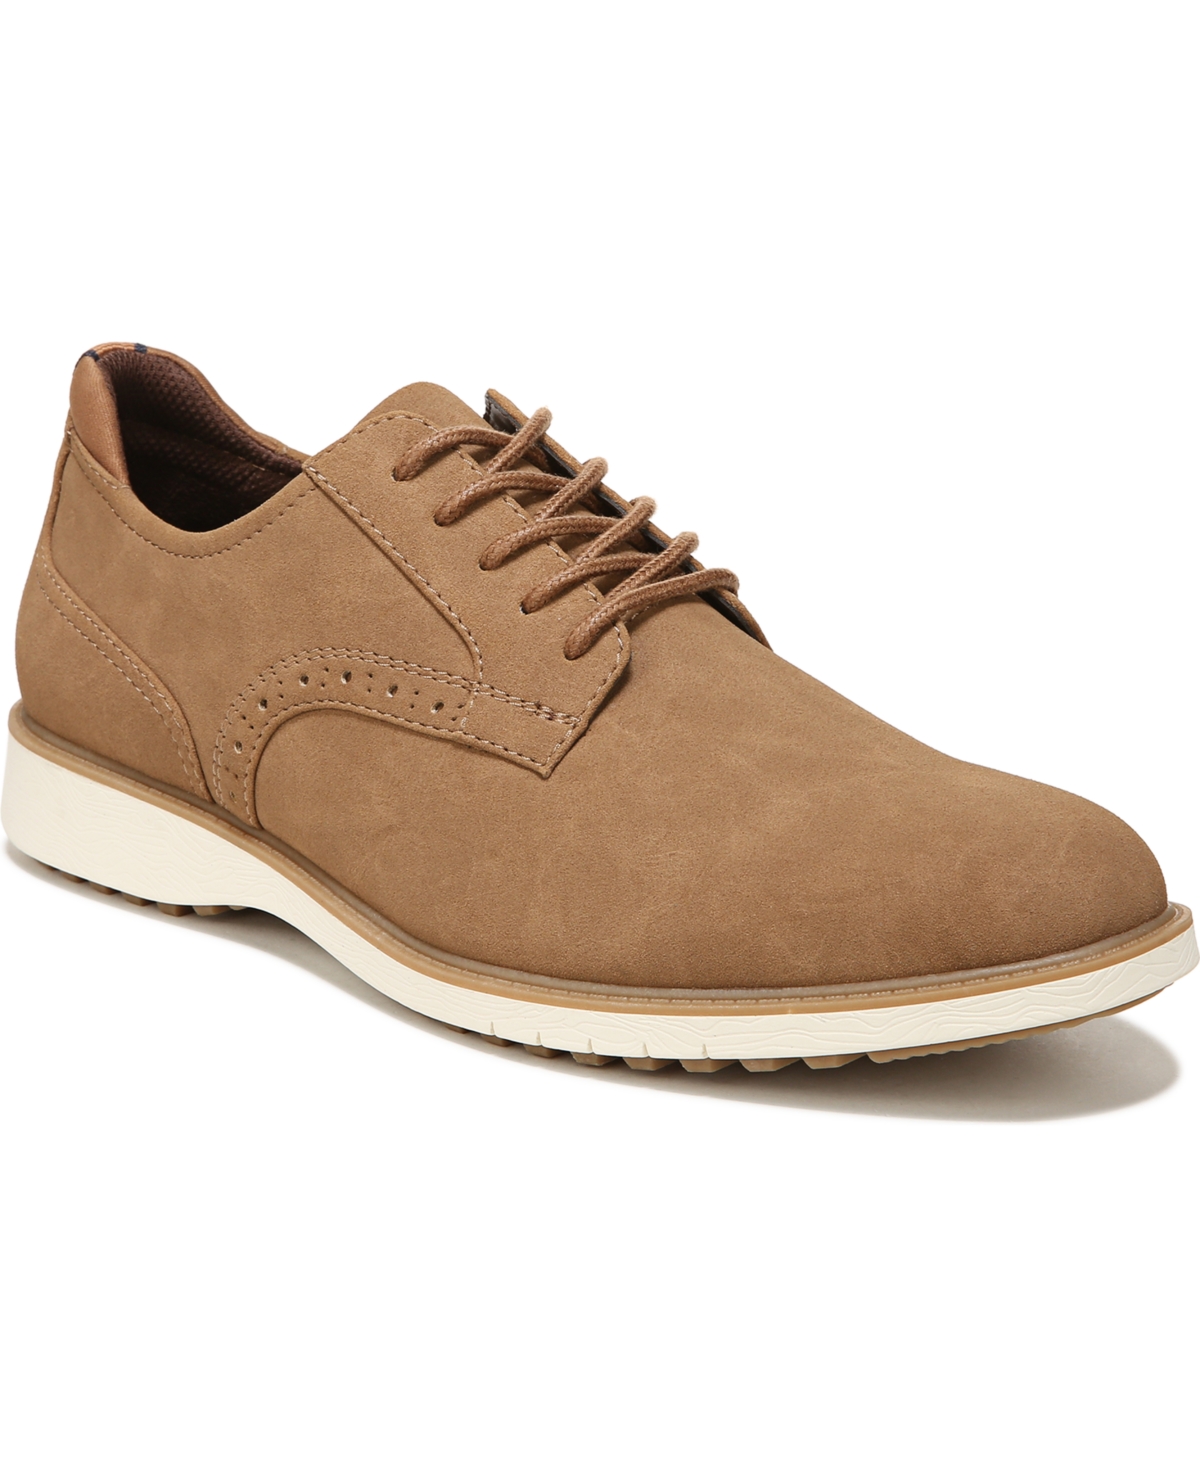 Shop Dr. Scholl's Men's Sync Up Lace-up Oxfords Shoes In Light Tan Brown